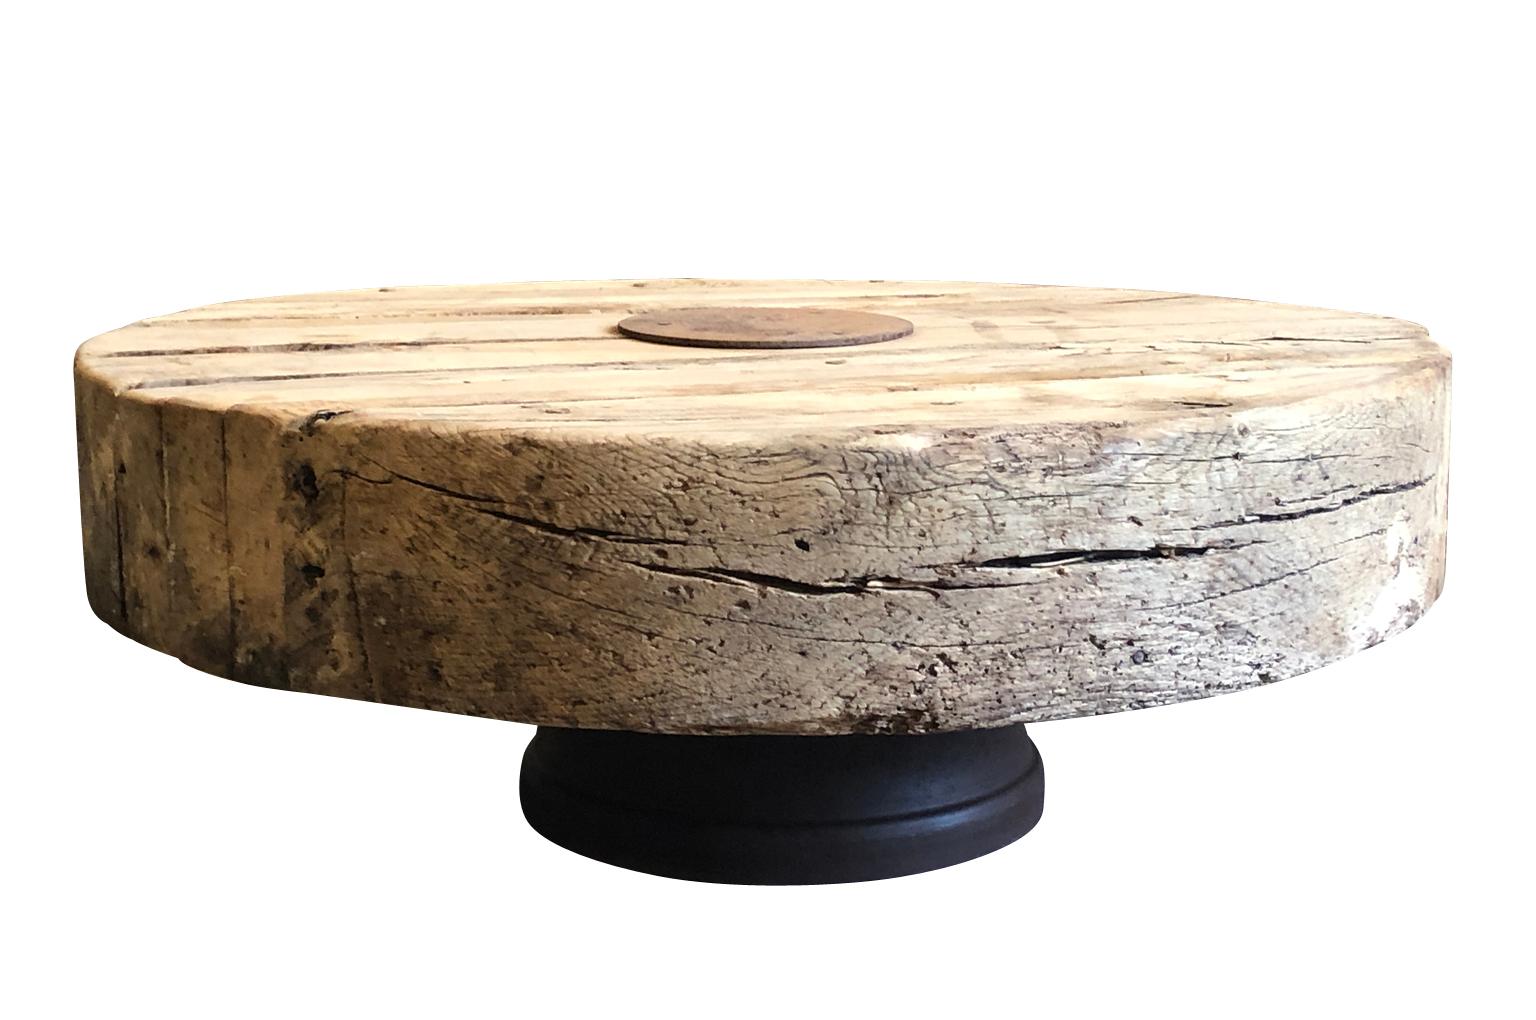 Sensational coffee table - constructed from an 18th century wine press - Pressoire - from a vineyard in the Provence region of France. The press sits sturdily on an iron base. Terrific patina. A tremendous piece for any interior or garden.